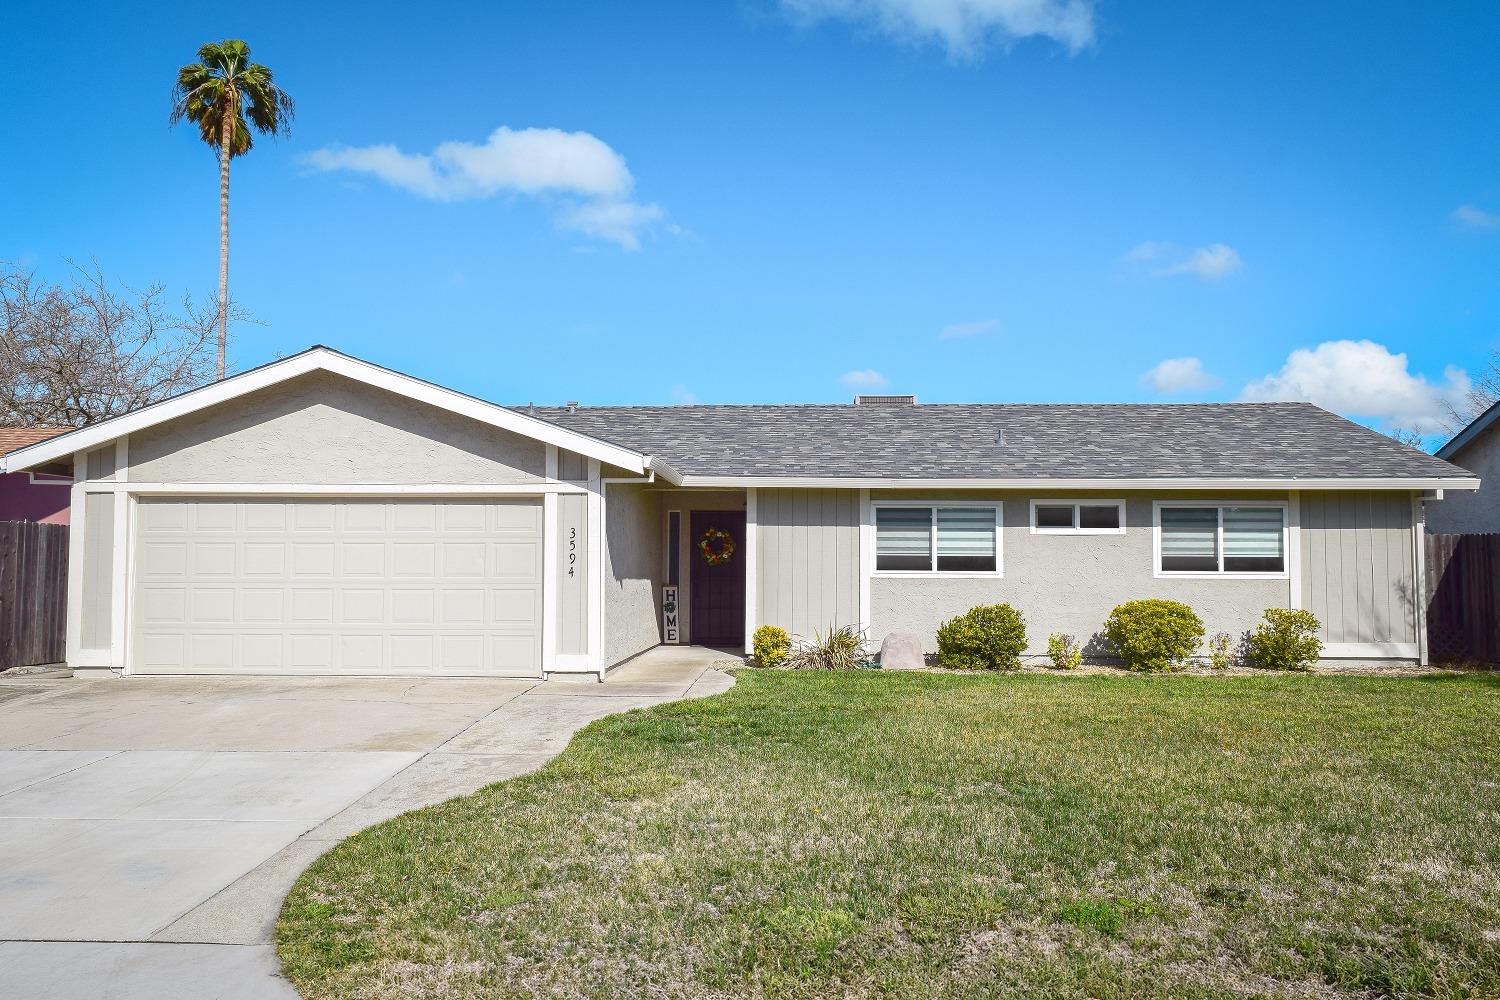 Photo of 3594 Scotland Dr in Antelope, CA